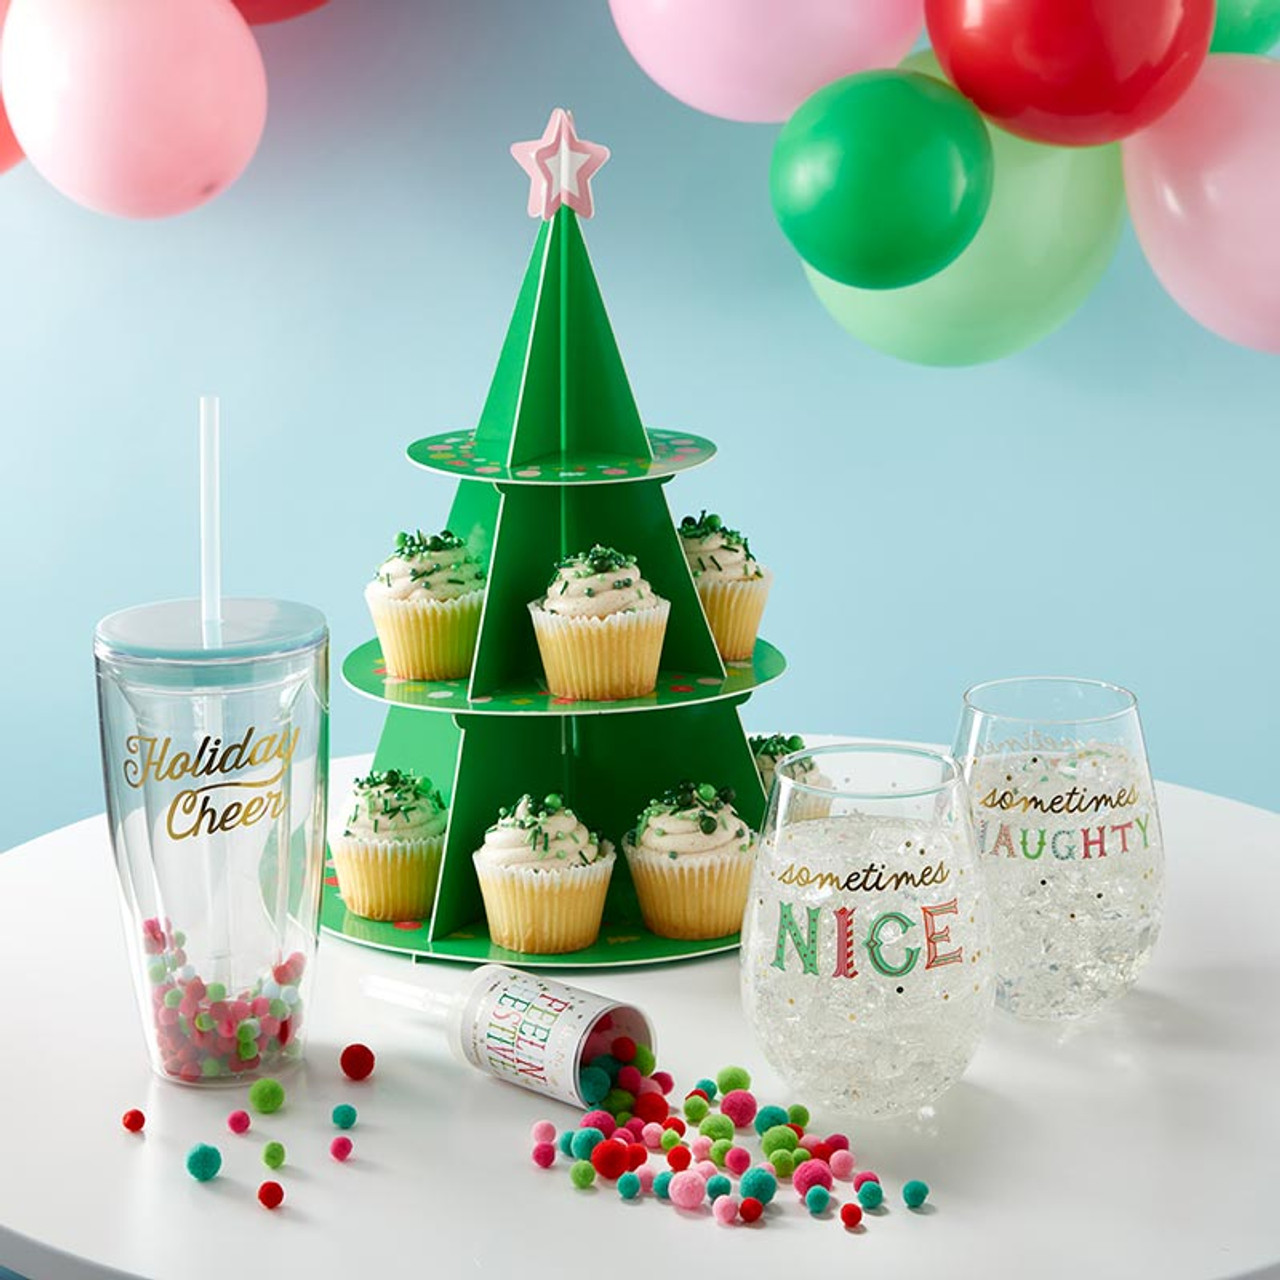 Nice And Naughty Stemless Wine Glass – Confetë Gifts + Party Boxes